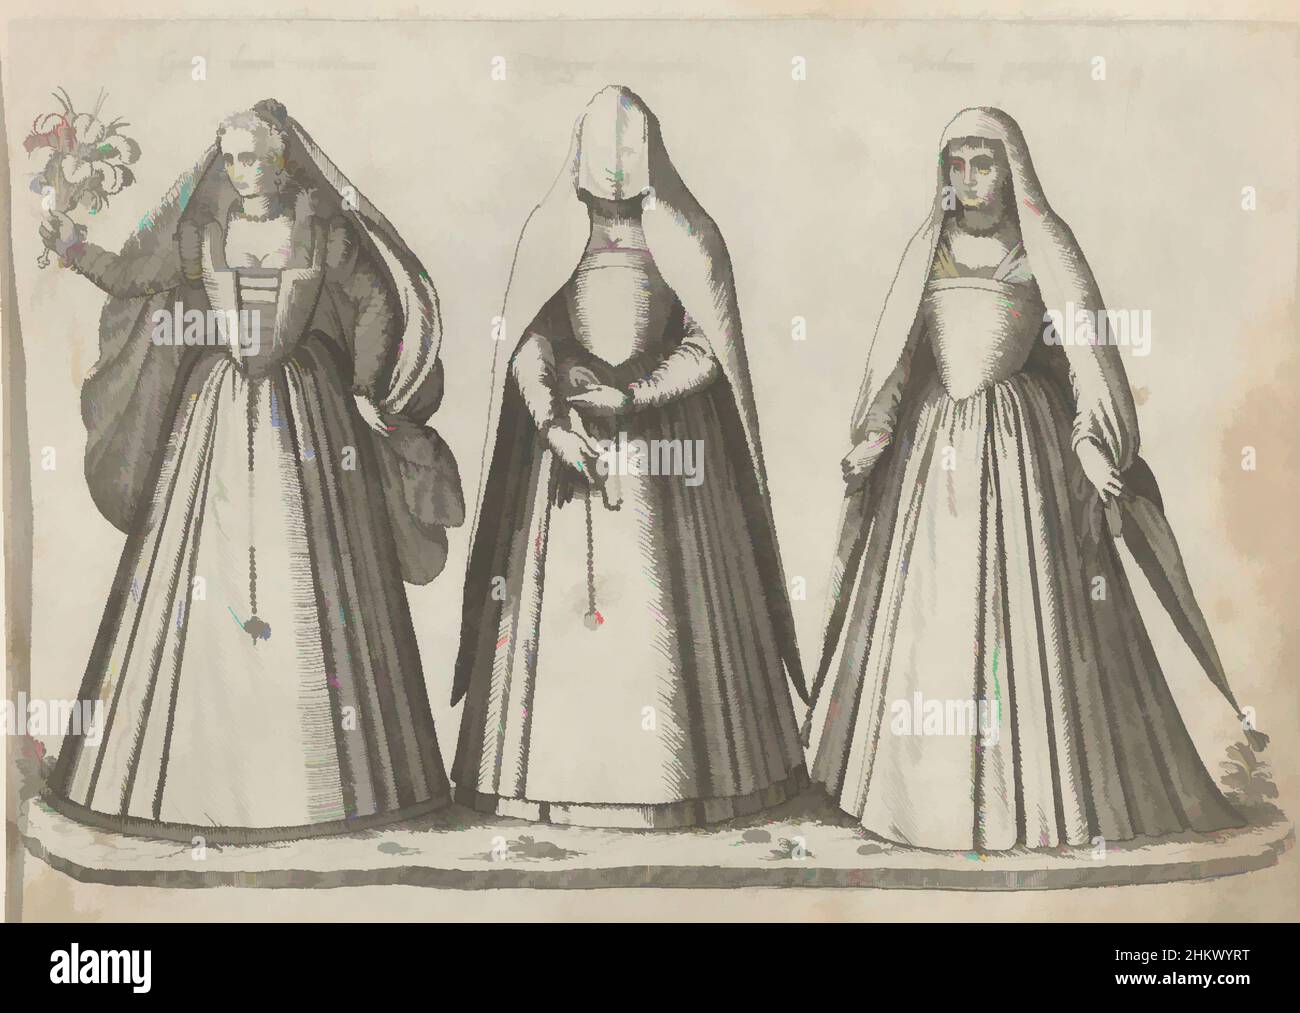 Art inspired by Three women, dressed according to Venetian fashion ca. 1580, Gentil donna venetiana, Vergine da marito, Vedova venetiana, On the left a noblewoman from Venice, feather fan in raised right hand. In the center, an unmarried virgin, veil over face, belt in hand. On the, Classic works modernized by Artotop with a splash of modernity. Shapes, color and value, eye-catching visual impact on art. Emotions through freedom of artworks in a contemporary way. A timeless message pursuing a wildly creative new direction. Artists turning to the digital medium and creating the Artotop NFT Stock Photo